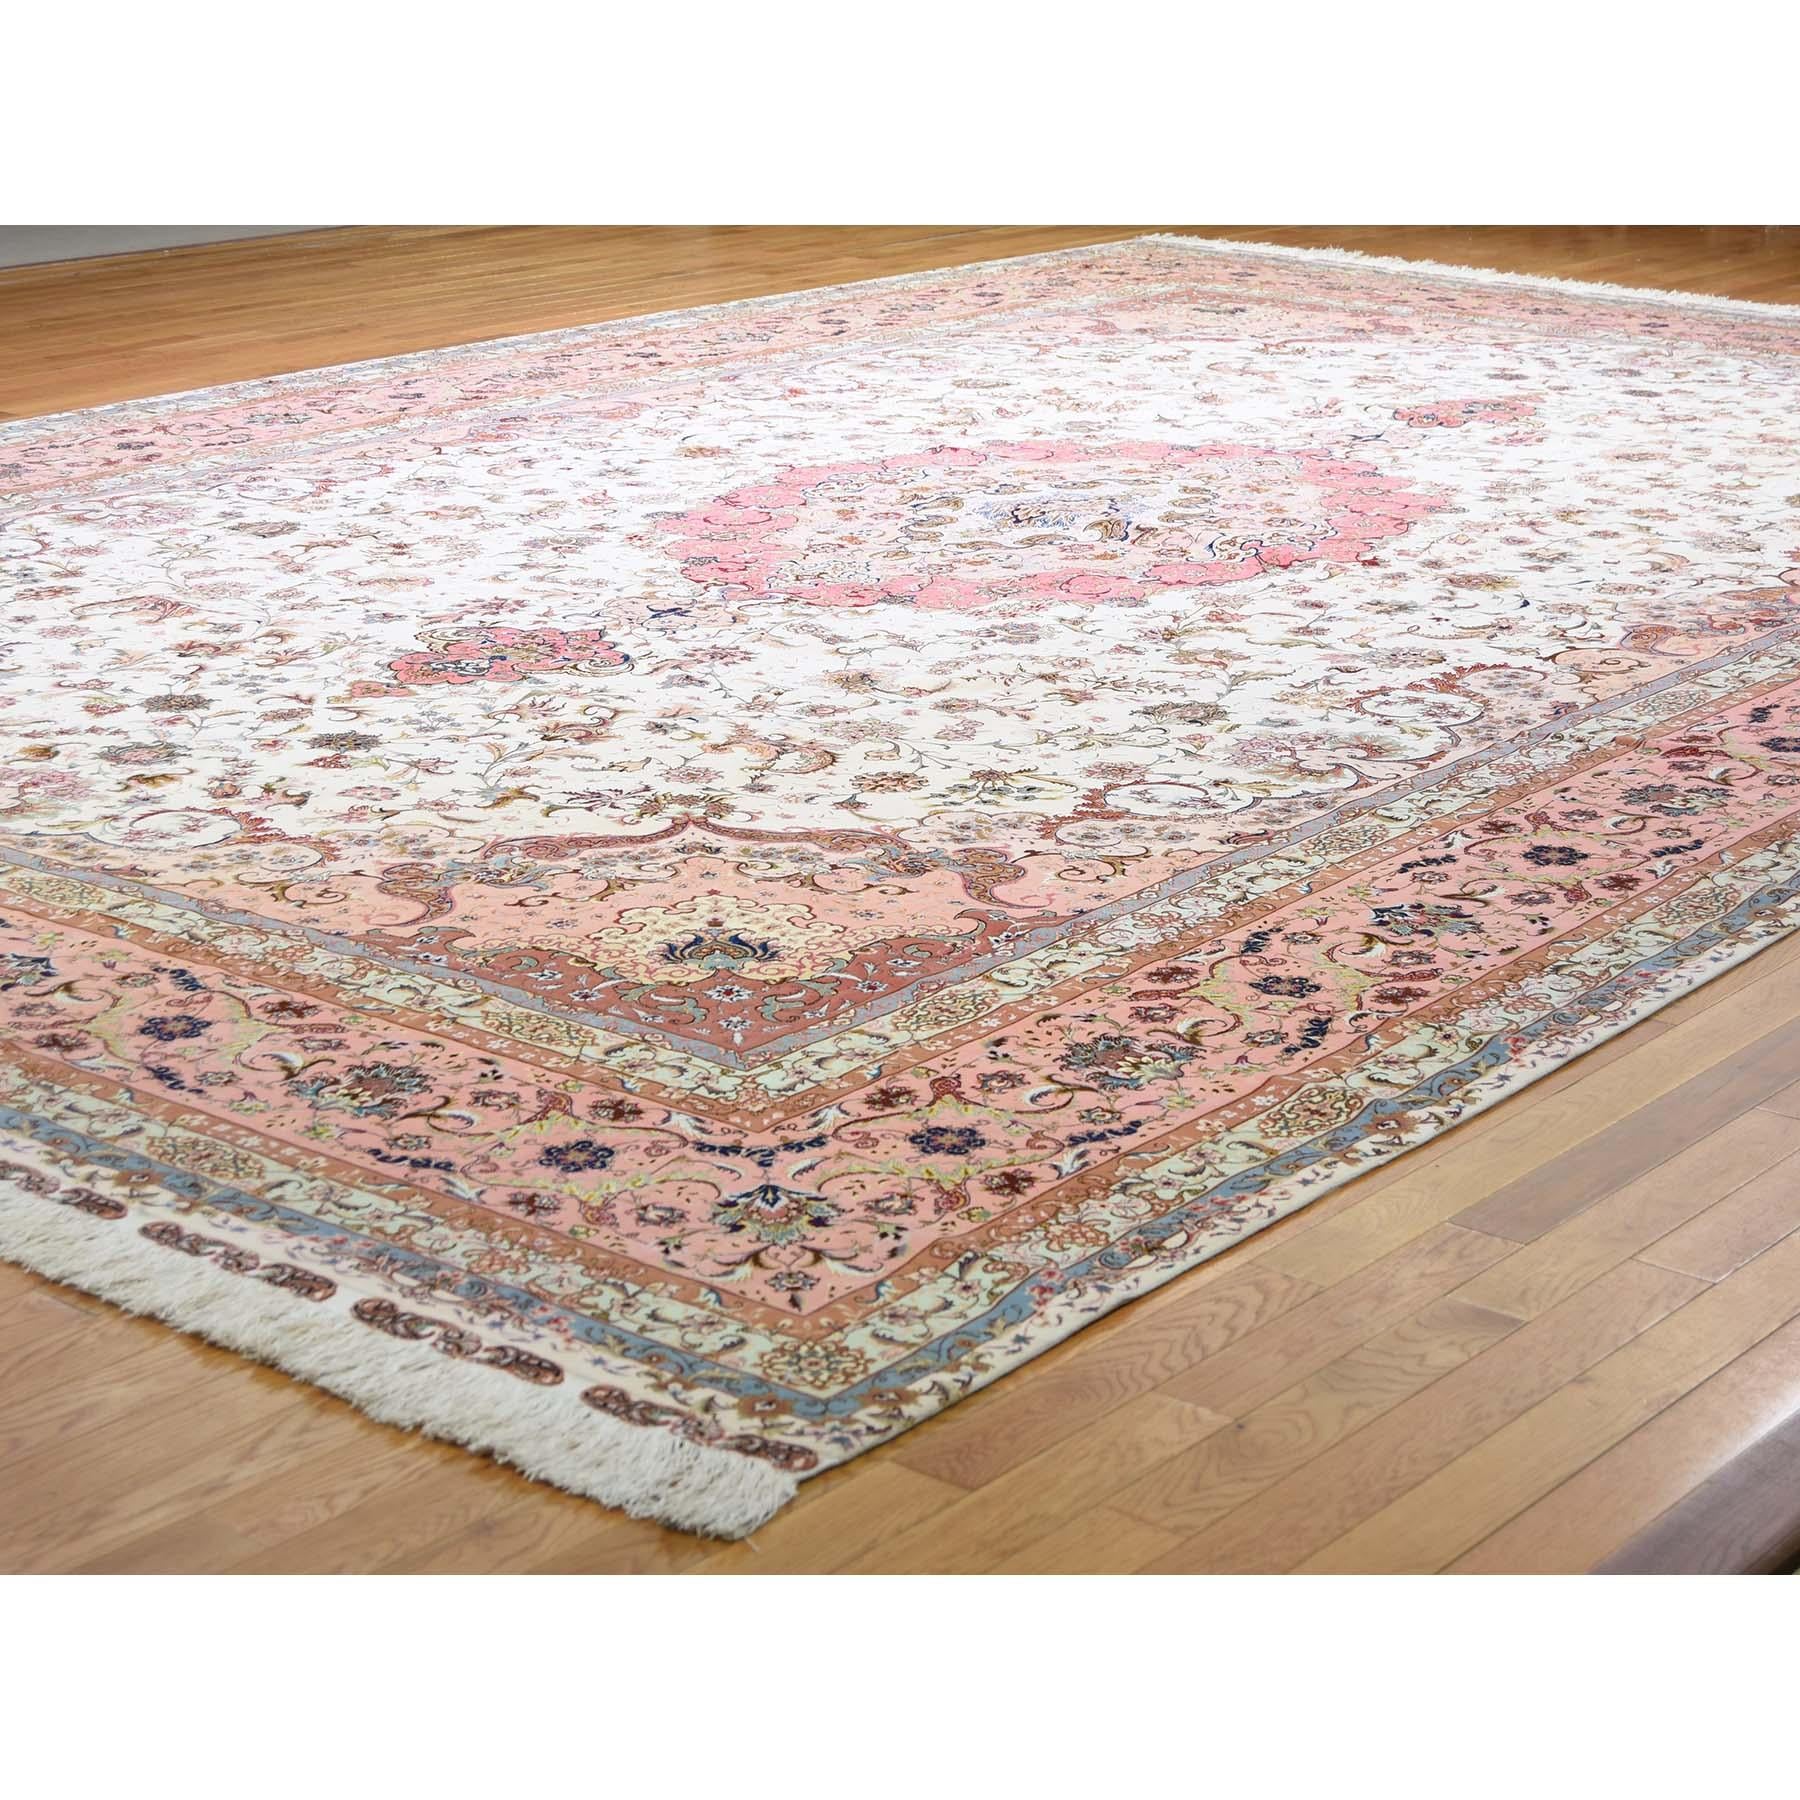 Persian Tabriz 400 Kpsi Mansion Size Wool and Silk Hand Knotted Rug 4